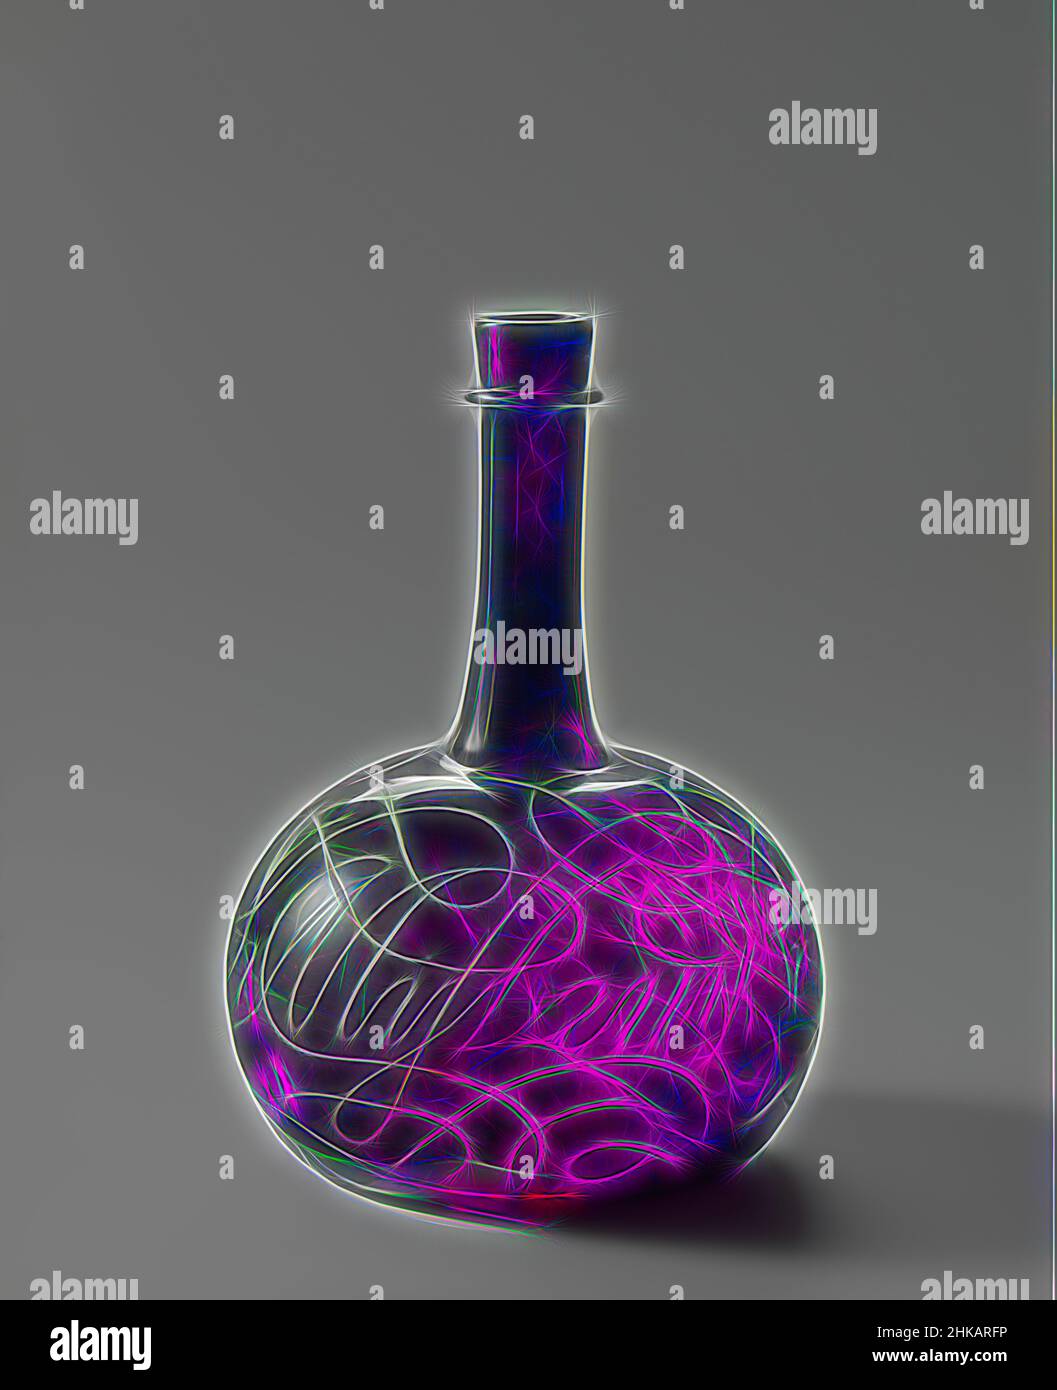 Inspired by Bottle, Bottle inscribed, Abuse of wyn.is Soul phenine, Bottle of purple glass with soul inserted. Spherical body, transitioning to a slender neck, which has a ring at the top. On the body is calligraphed in Italian script 'Abuse of wyn.is Soul-phen.' On the bottom around the pontil mark, Reimagined by Artotop. Classic art reinvented with a modern twist. Design of warm cheerful glowing of brightness and light ray radiance. Photography inspired by surrealism and futurism, embracing dynamic energy of modern technology, movement, speed and revolutionize culture Stock Photo